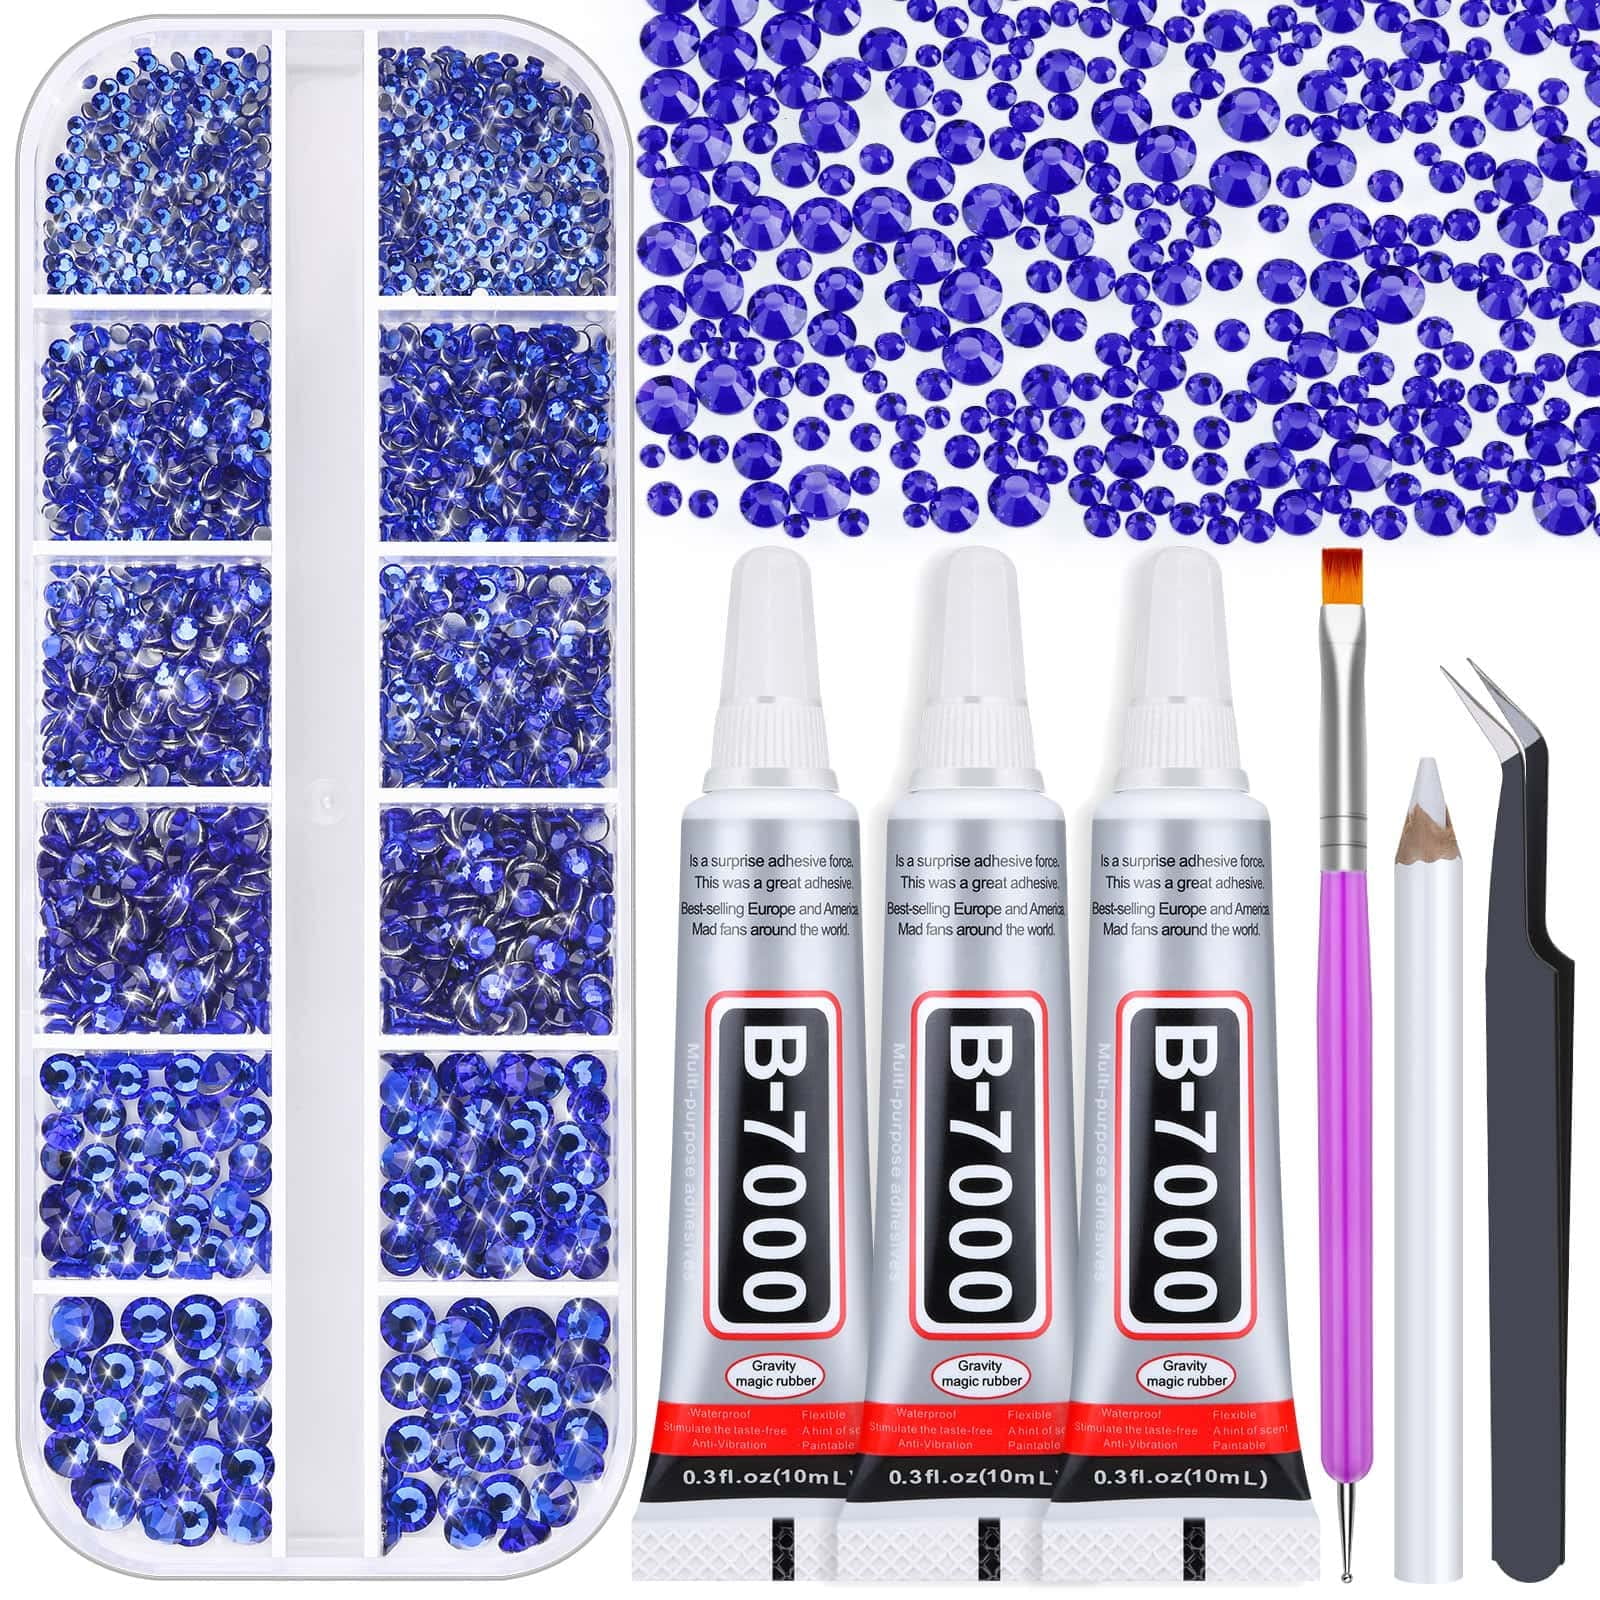 Rhinestones Glue for Fabric, 2100Pcs Craft Rhinestones Flatback with B7000 Glue  Adhesive, Glass Gemstones with Tweezers for Bling Craft, Jewelry Making,  Makeup, Cloth Shoes and Nail Art 